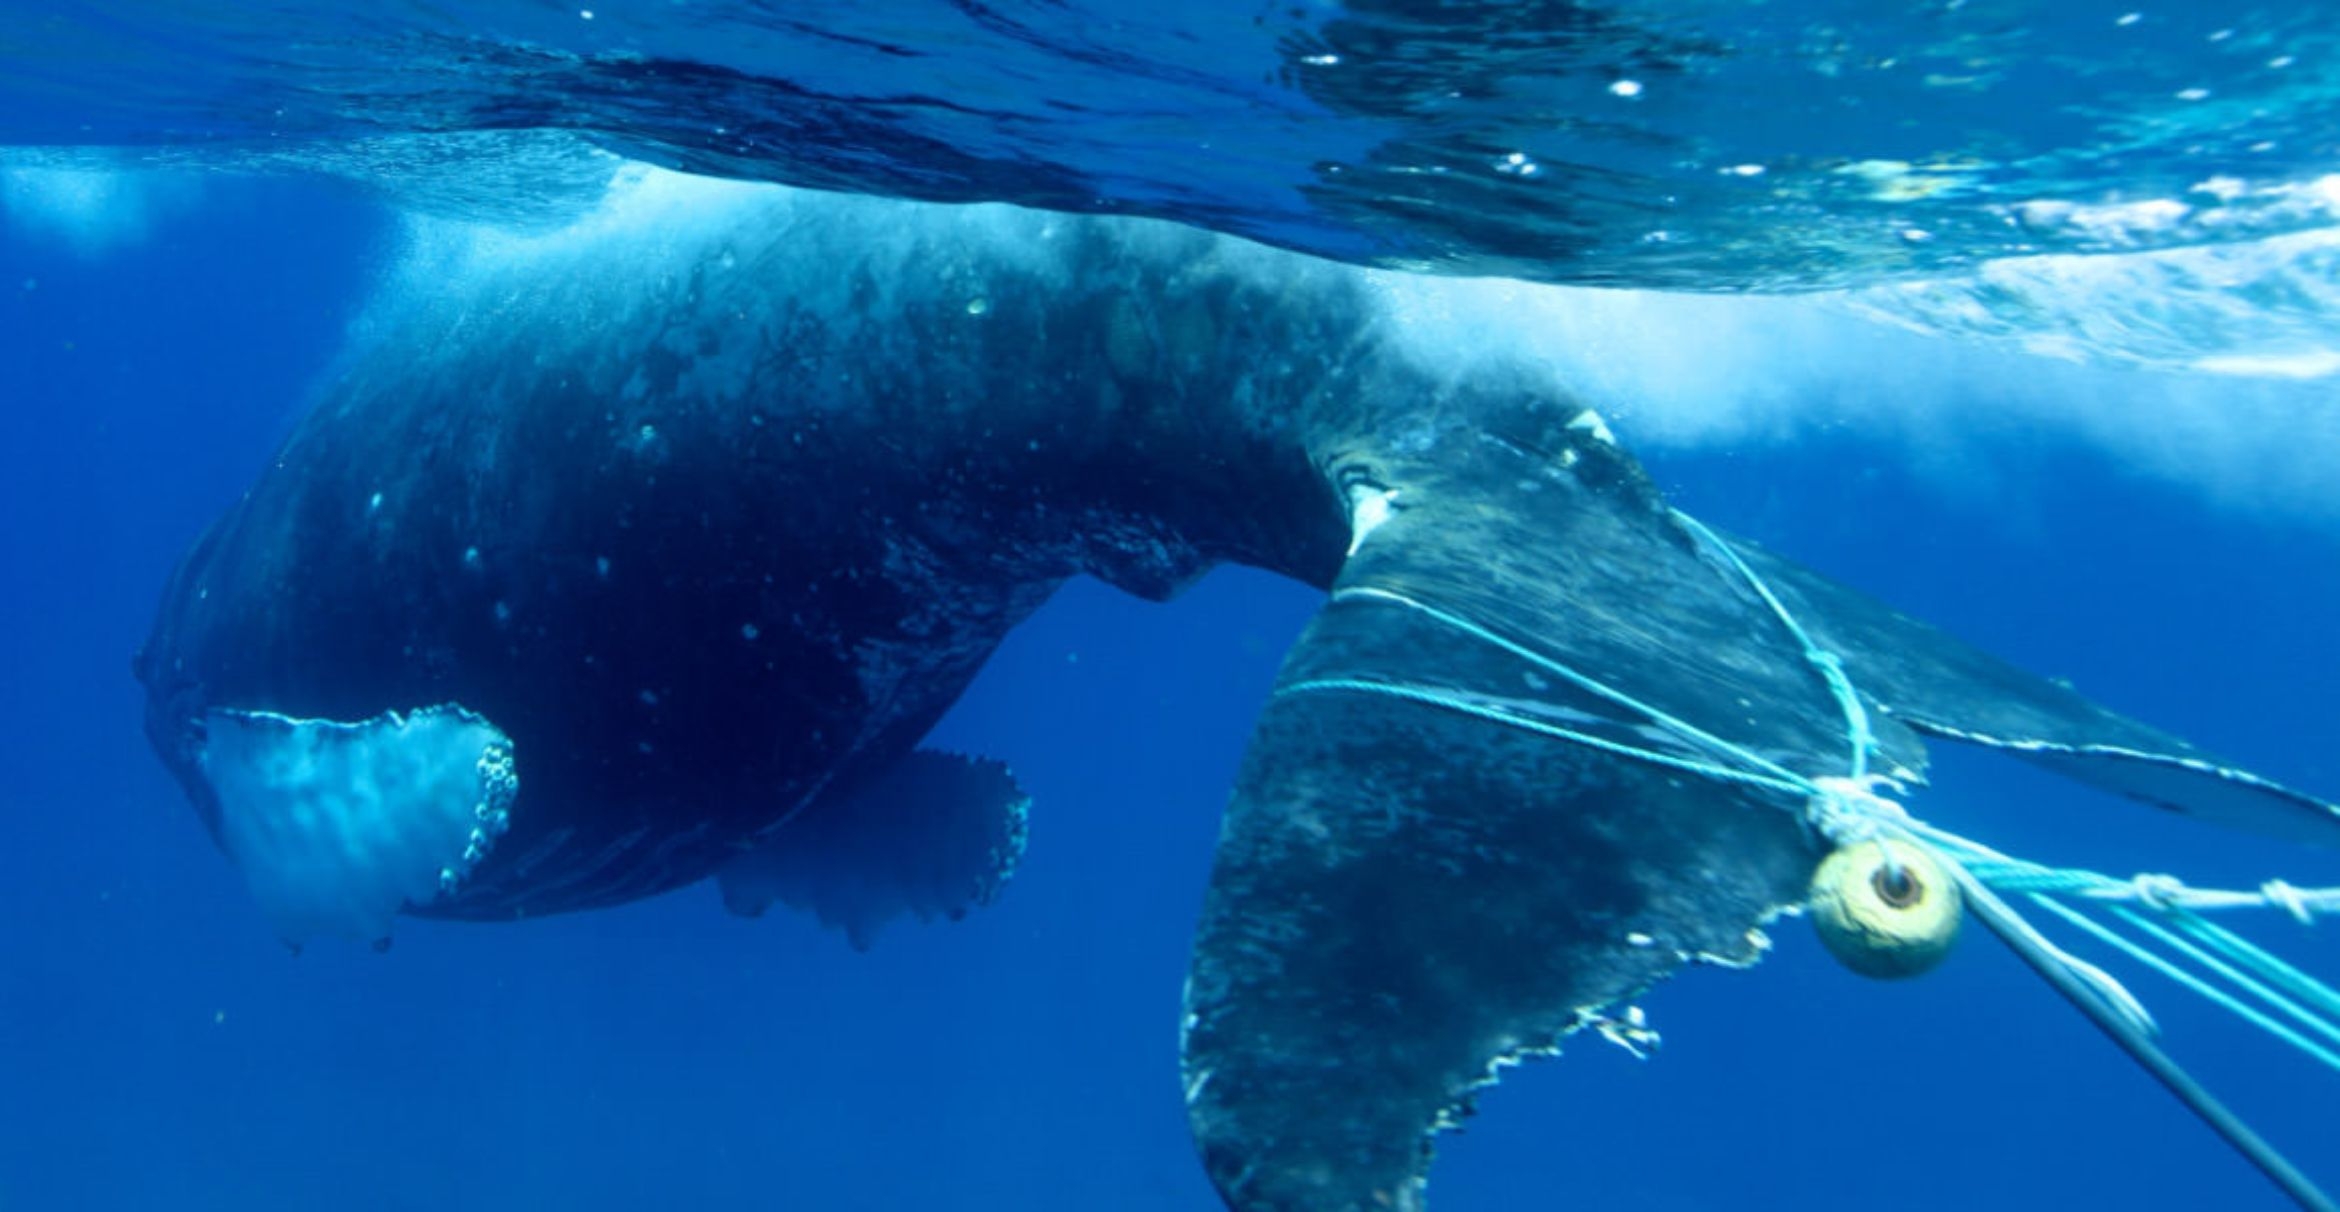 Reducing fishing gear could save whales with low impacts to